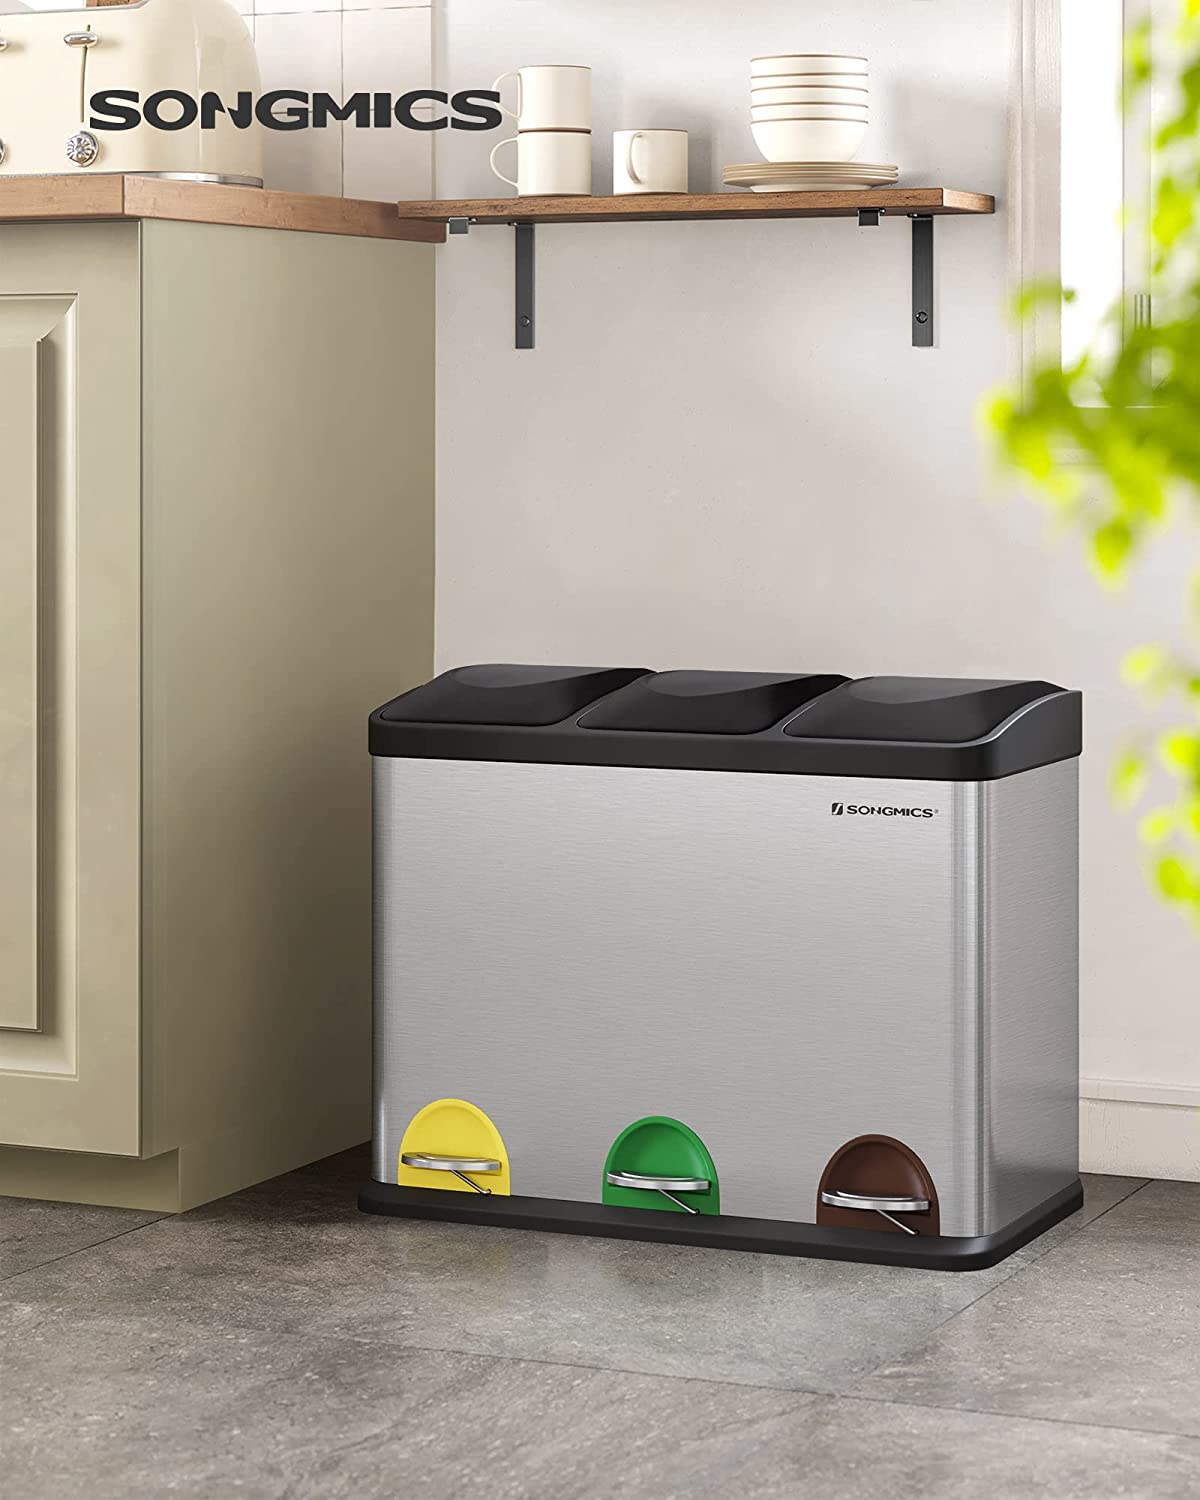 Recycling Bin, Pedal Bin, 45-Litre Metal Rubbish Bin, Waste Separation System Dustbin for Kitchen, Durable, 3 x 15 Litres, Stainless Steel